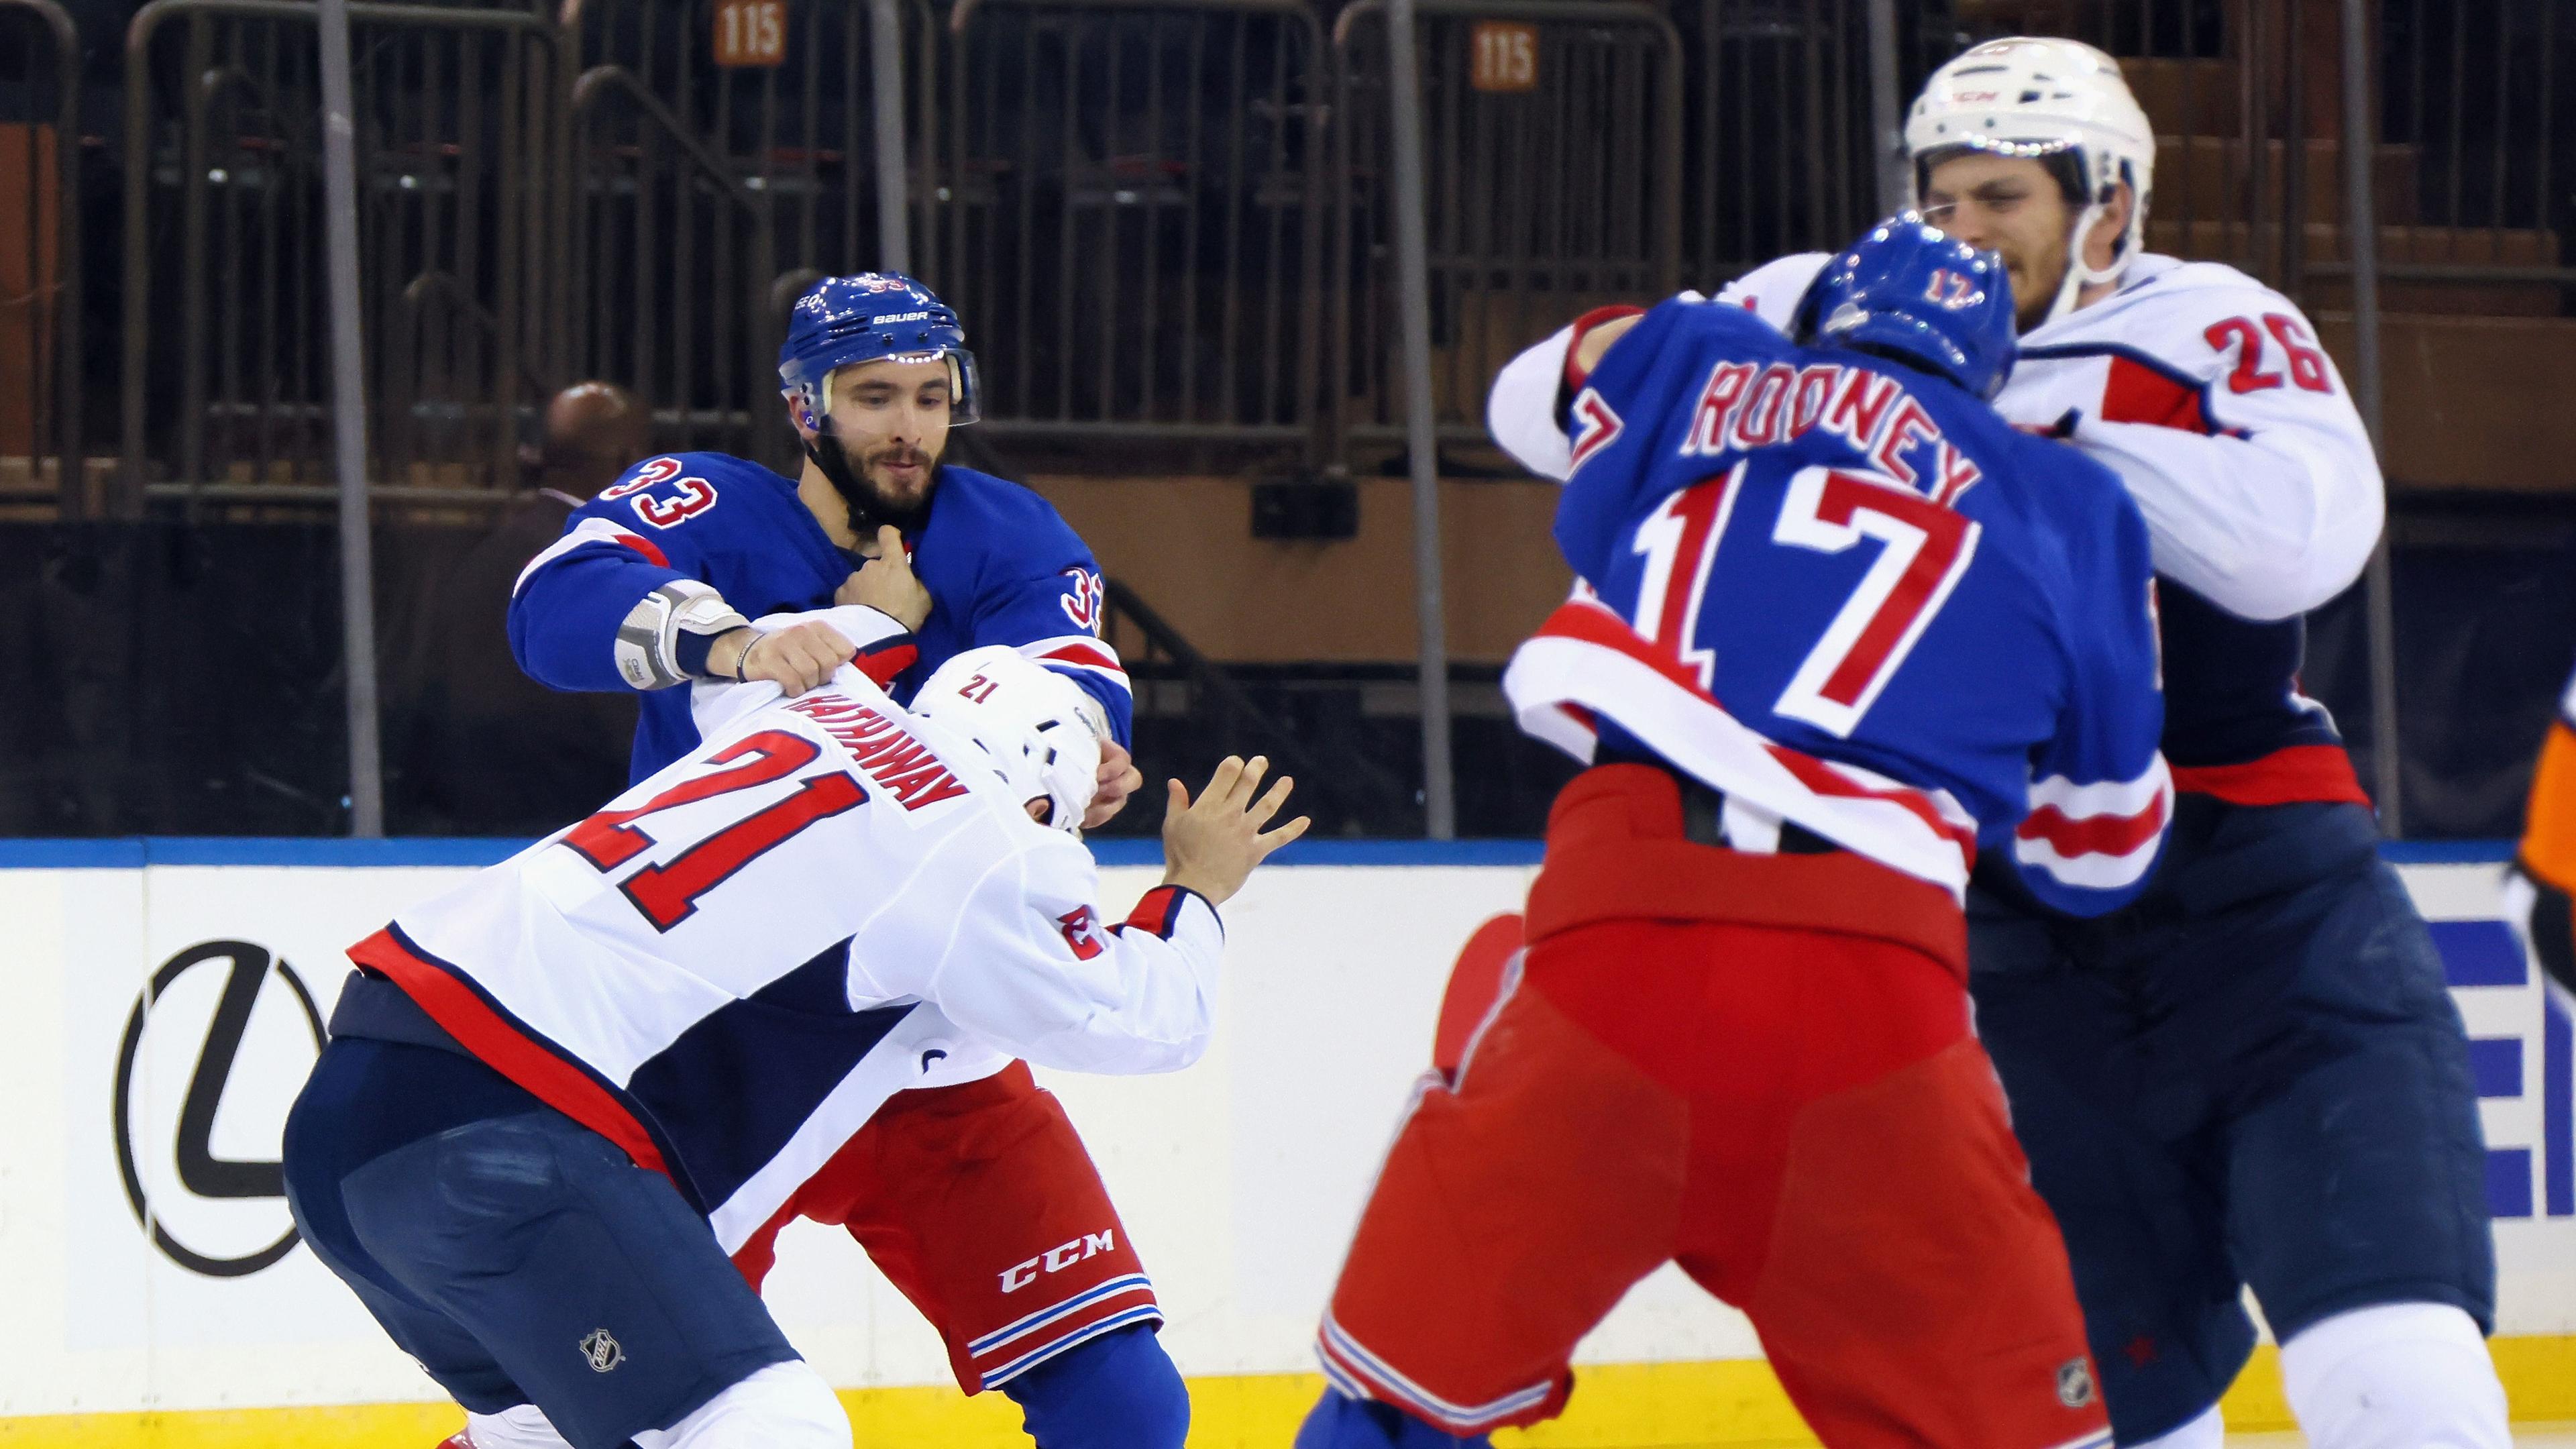 May 5, 2021; New York, New York, USA; The game between the Washington Capitals and the New York Rangers starts with a line brawl one second into play at Madison Square Garden. / Bruce Bennett/POOL PHOTOS-USA TODAY Sports